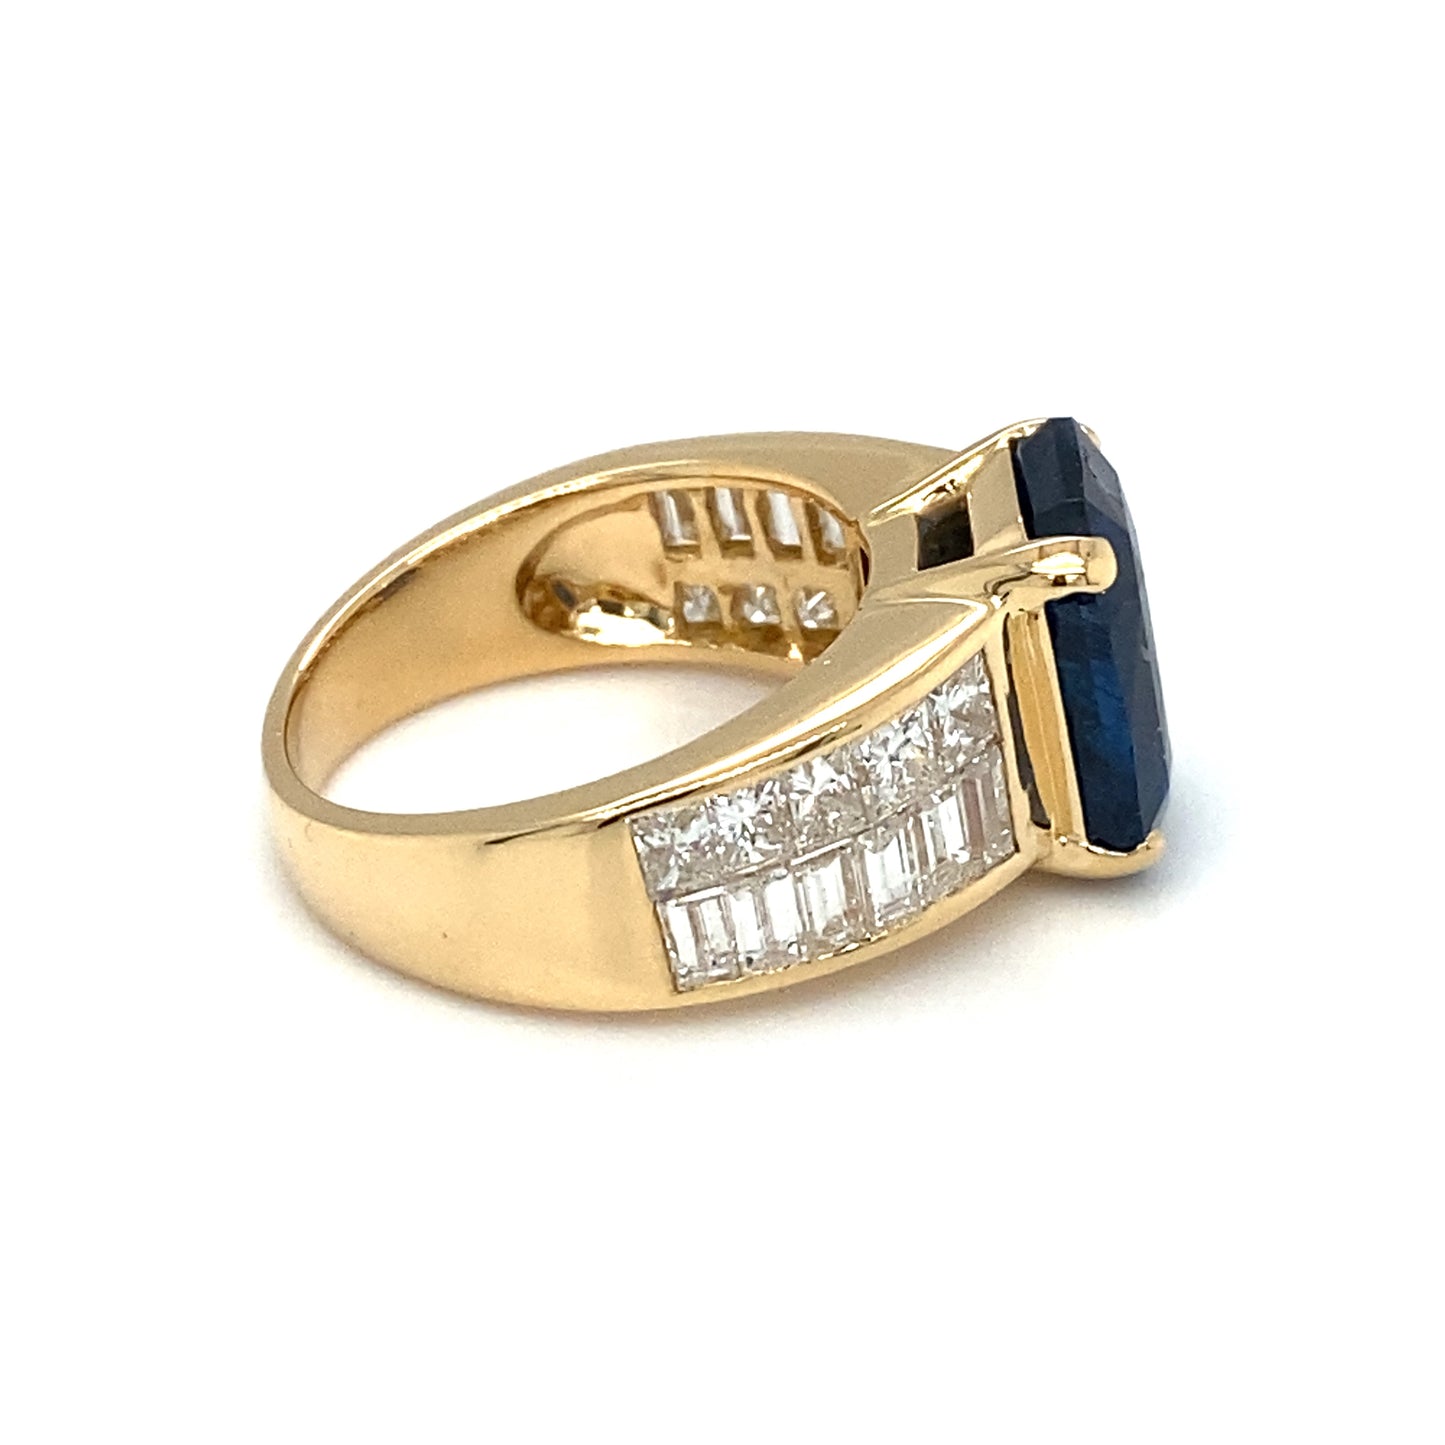 GIA 6.35ct Emerald Cut Sapphire and Diamond Cocktail Ring in 18K Gold